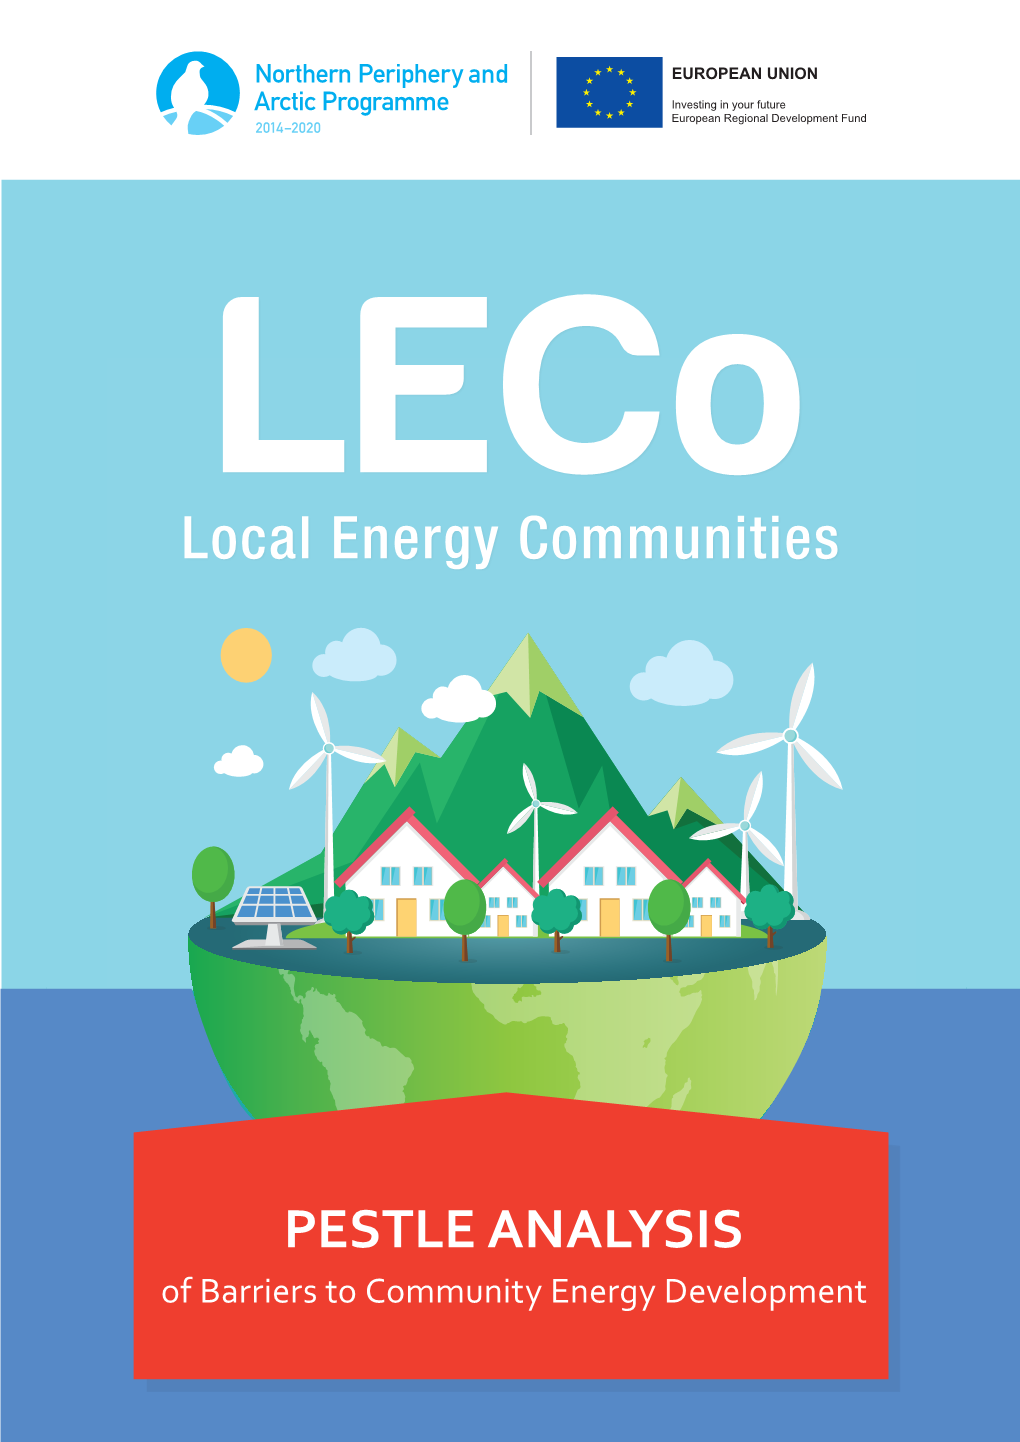 PESTLE ANALYSIS of Barriers to Community Energy Development